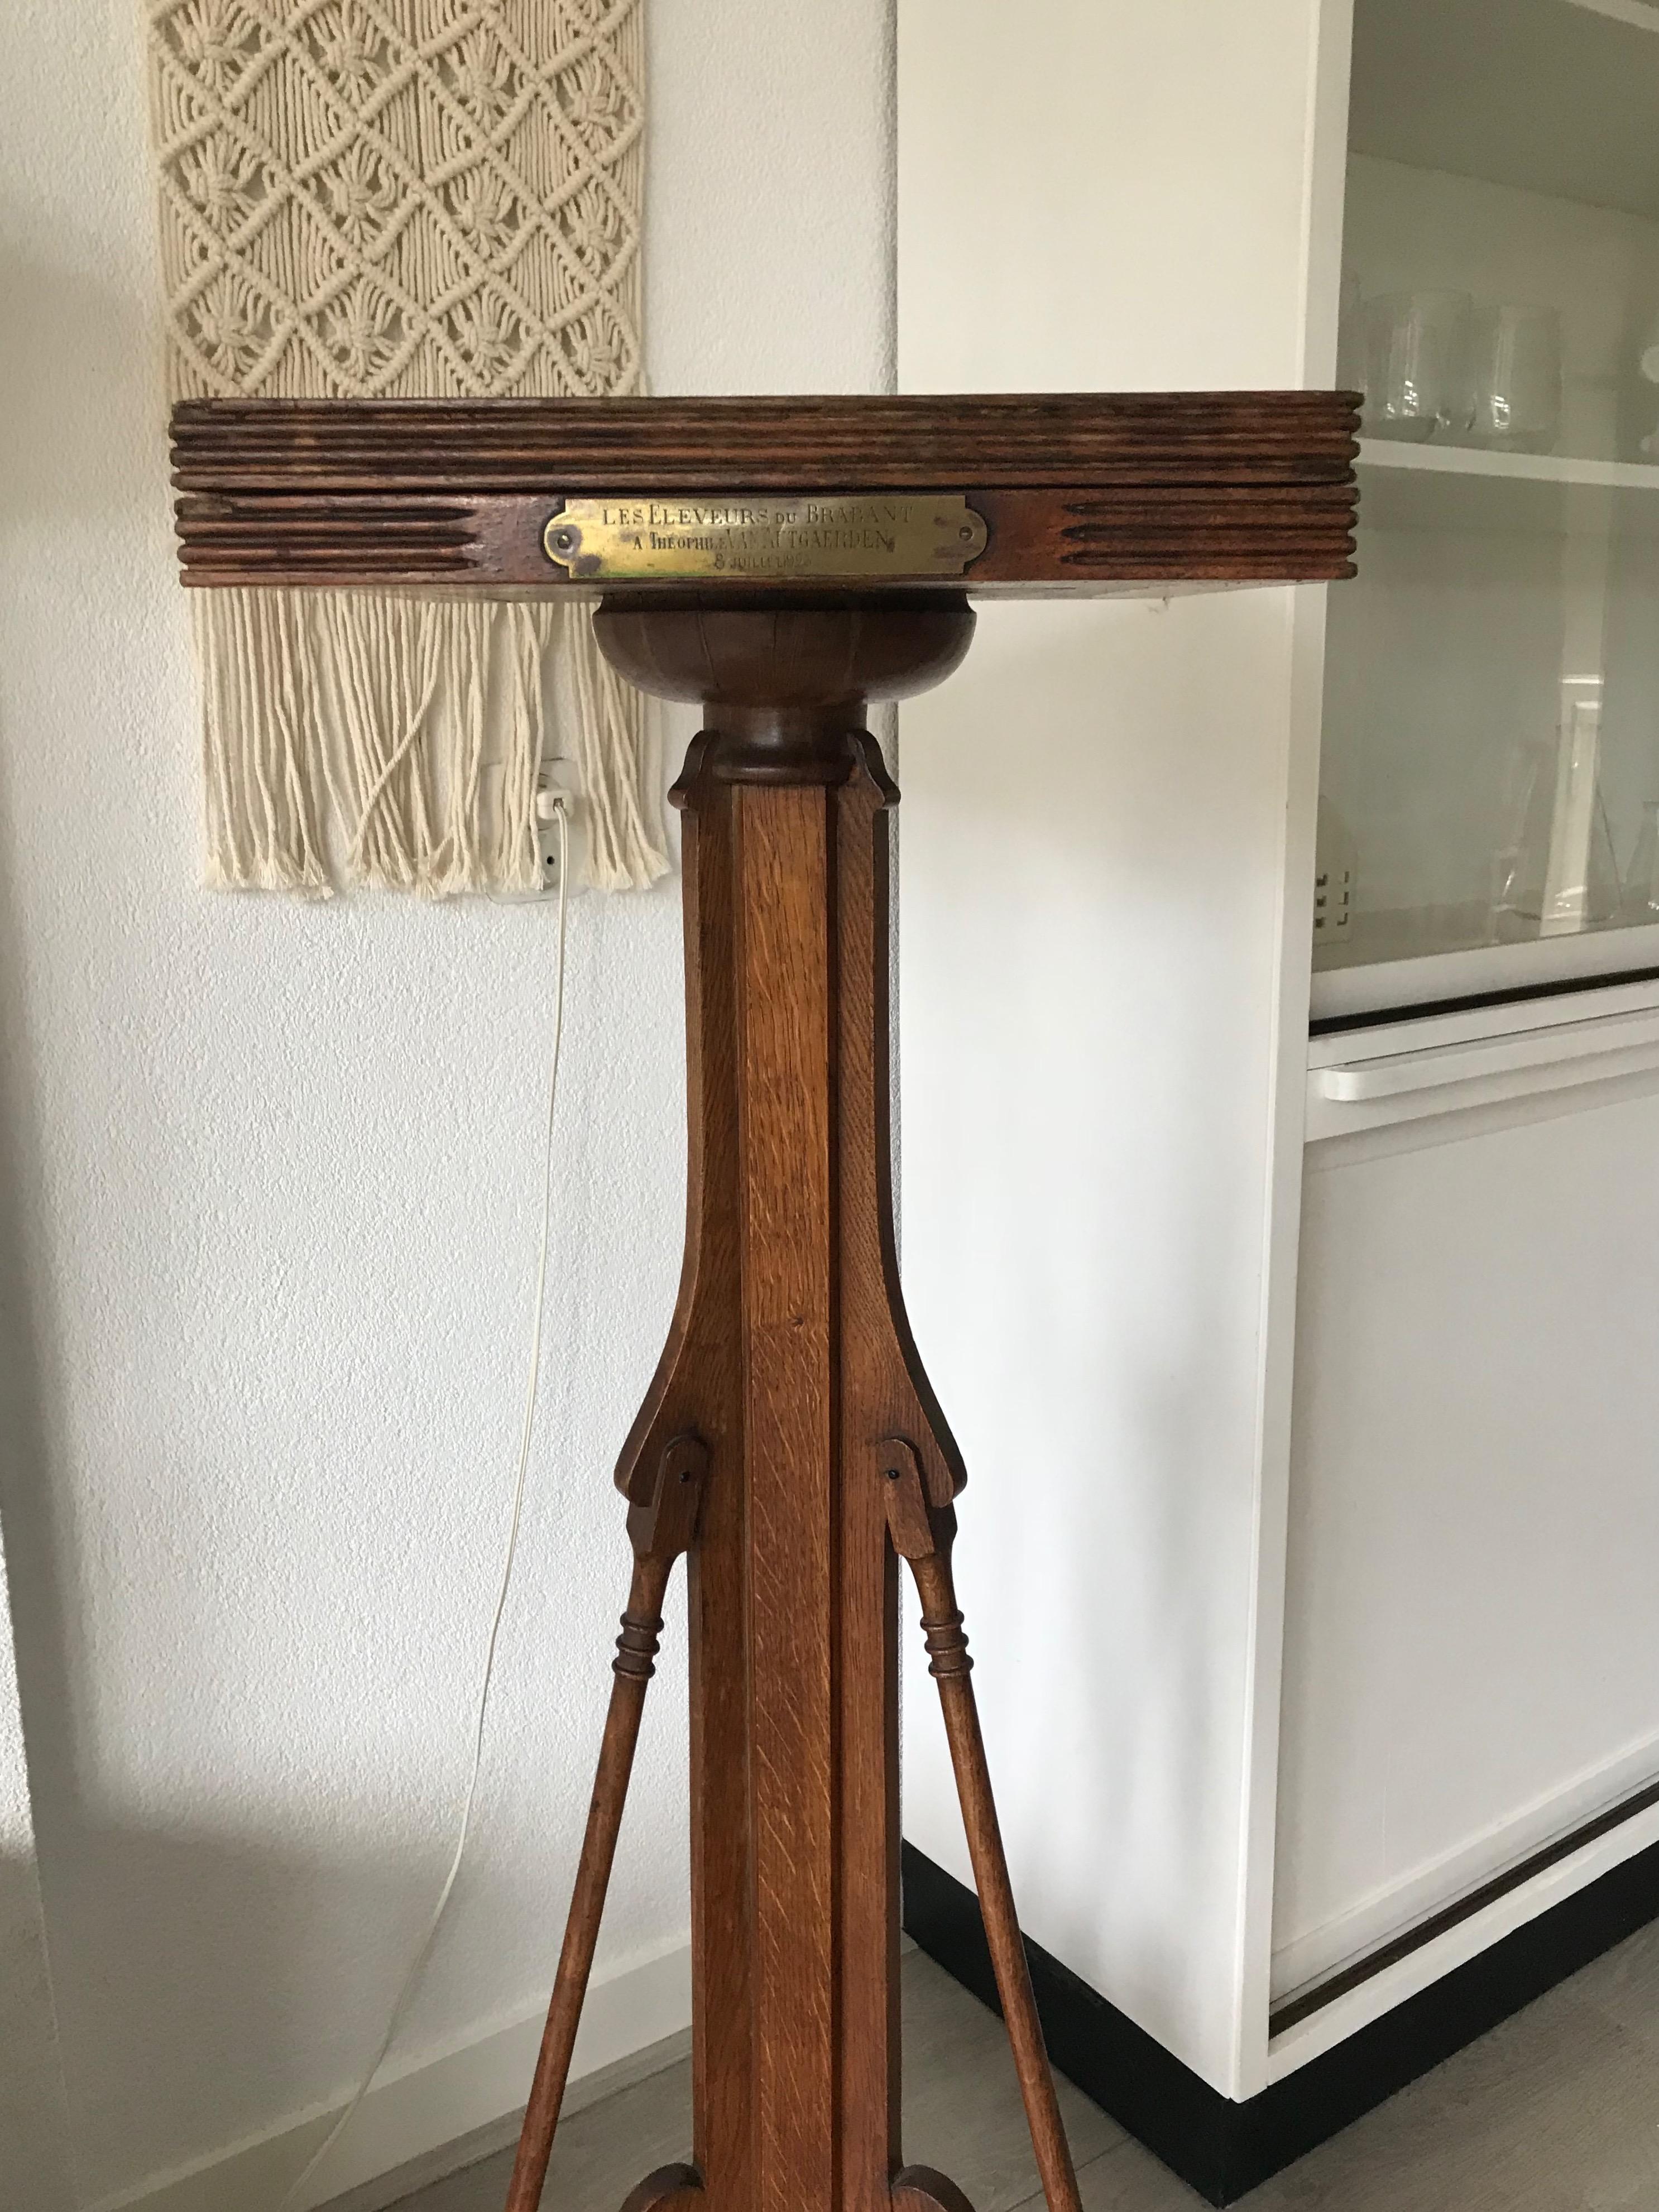 Rare and very attractive sculptors display stand from early 1900s., in the style of Henry van der Velde.

This symmetrical design and all-handcrafted tripod work easel makes a great stand for sculptures and other works of art. This highly stylish